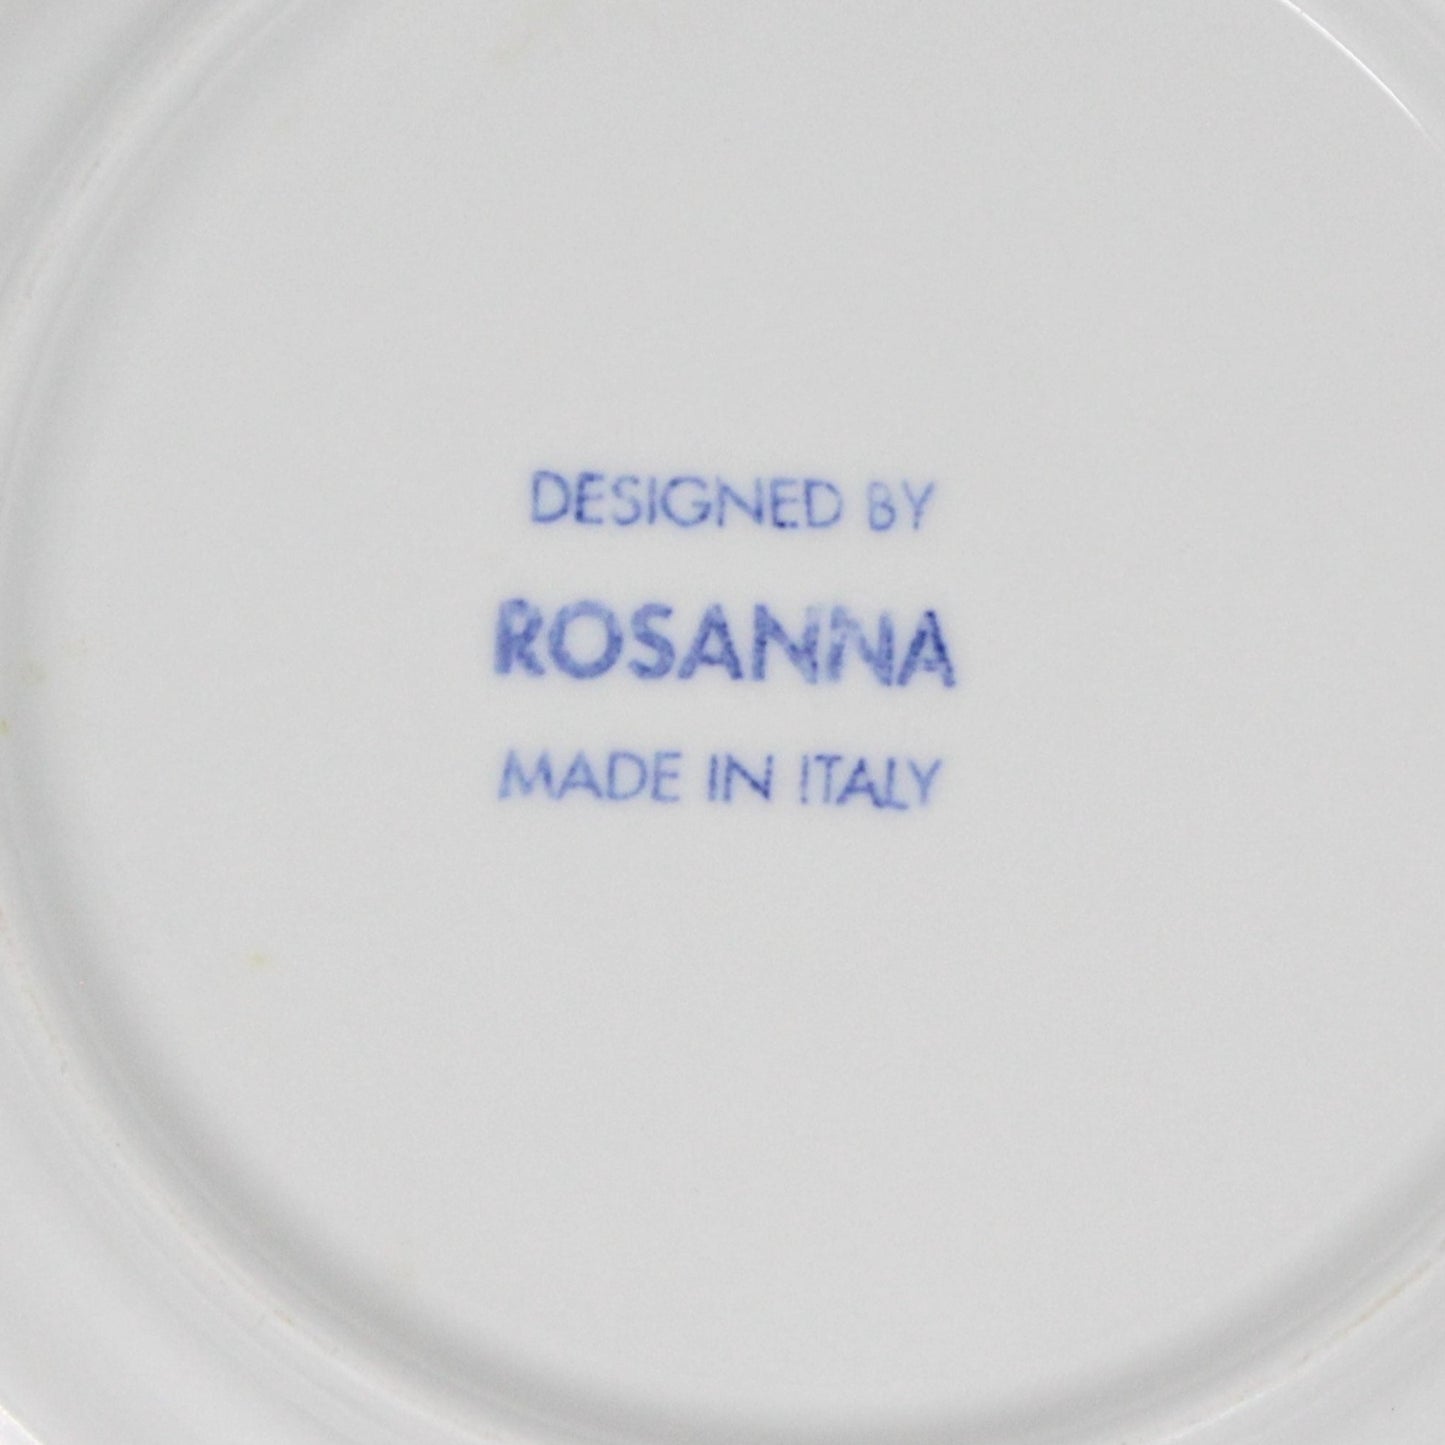 Decorative Plate, New Year's Plate, 1940 Jitterbug, Rosanna, Italy, Vintage